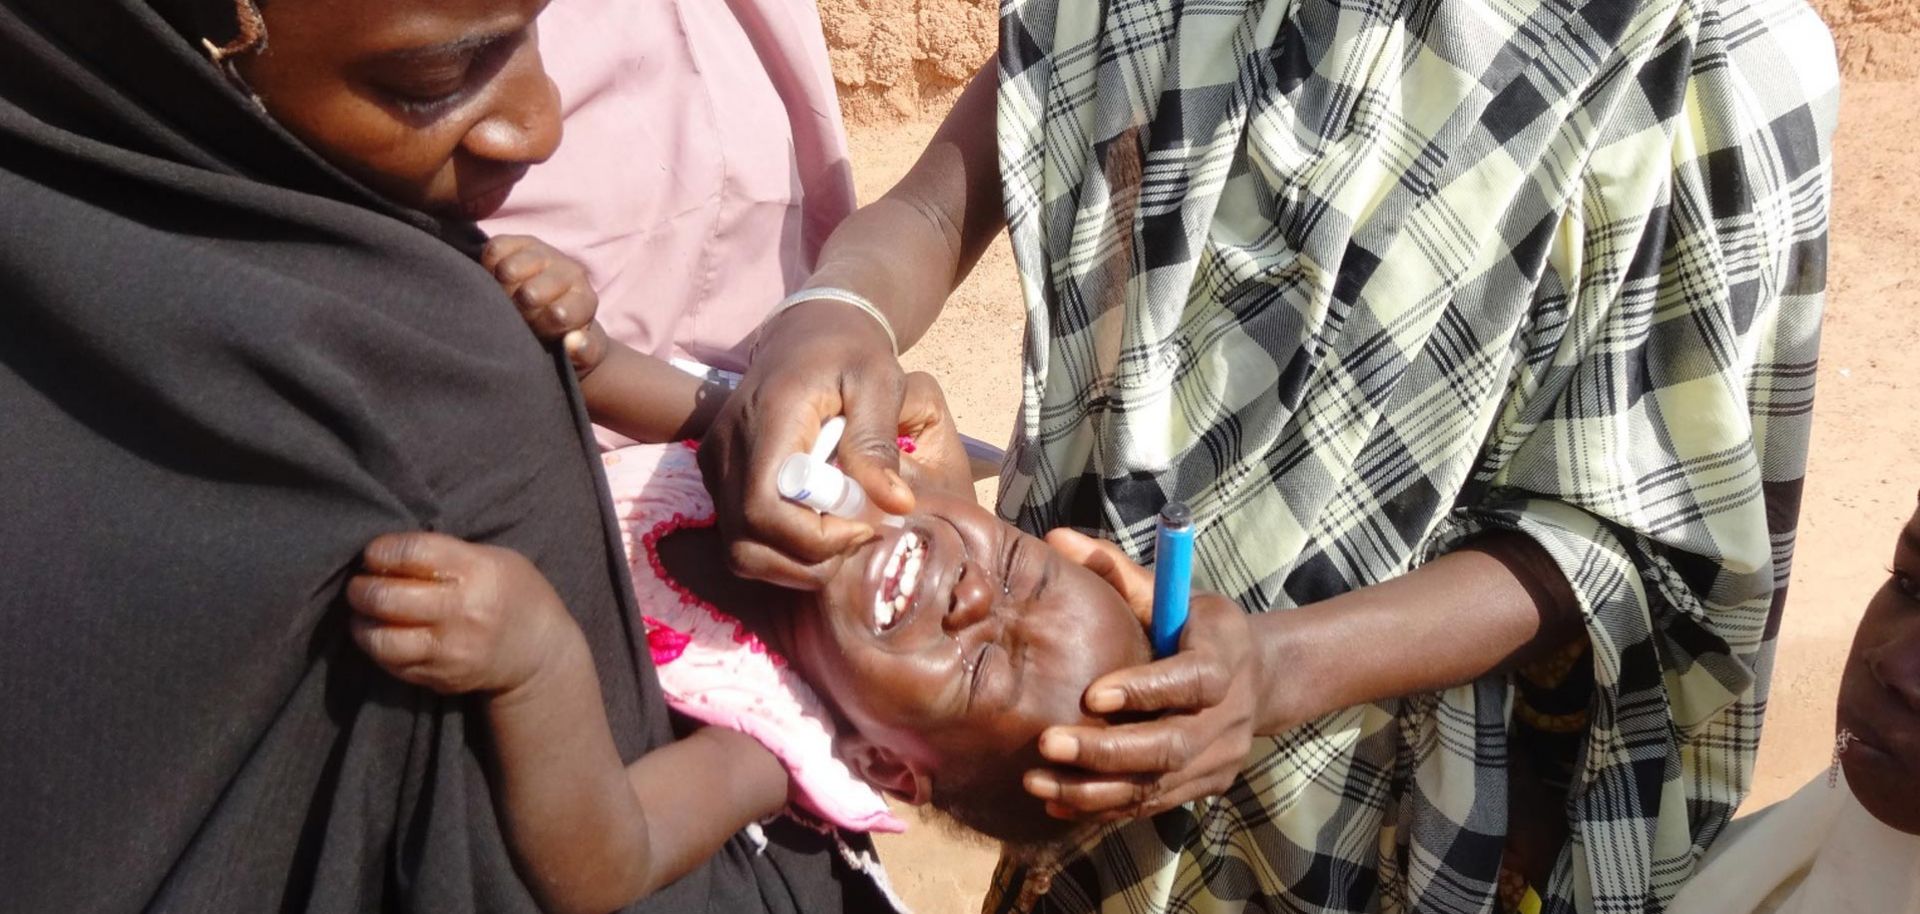 A health care worker administers an oral dose of polio vaccine to a child in northern Nigeria.